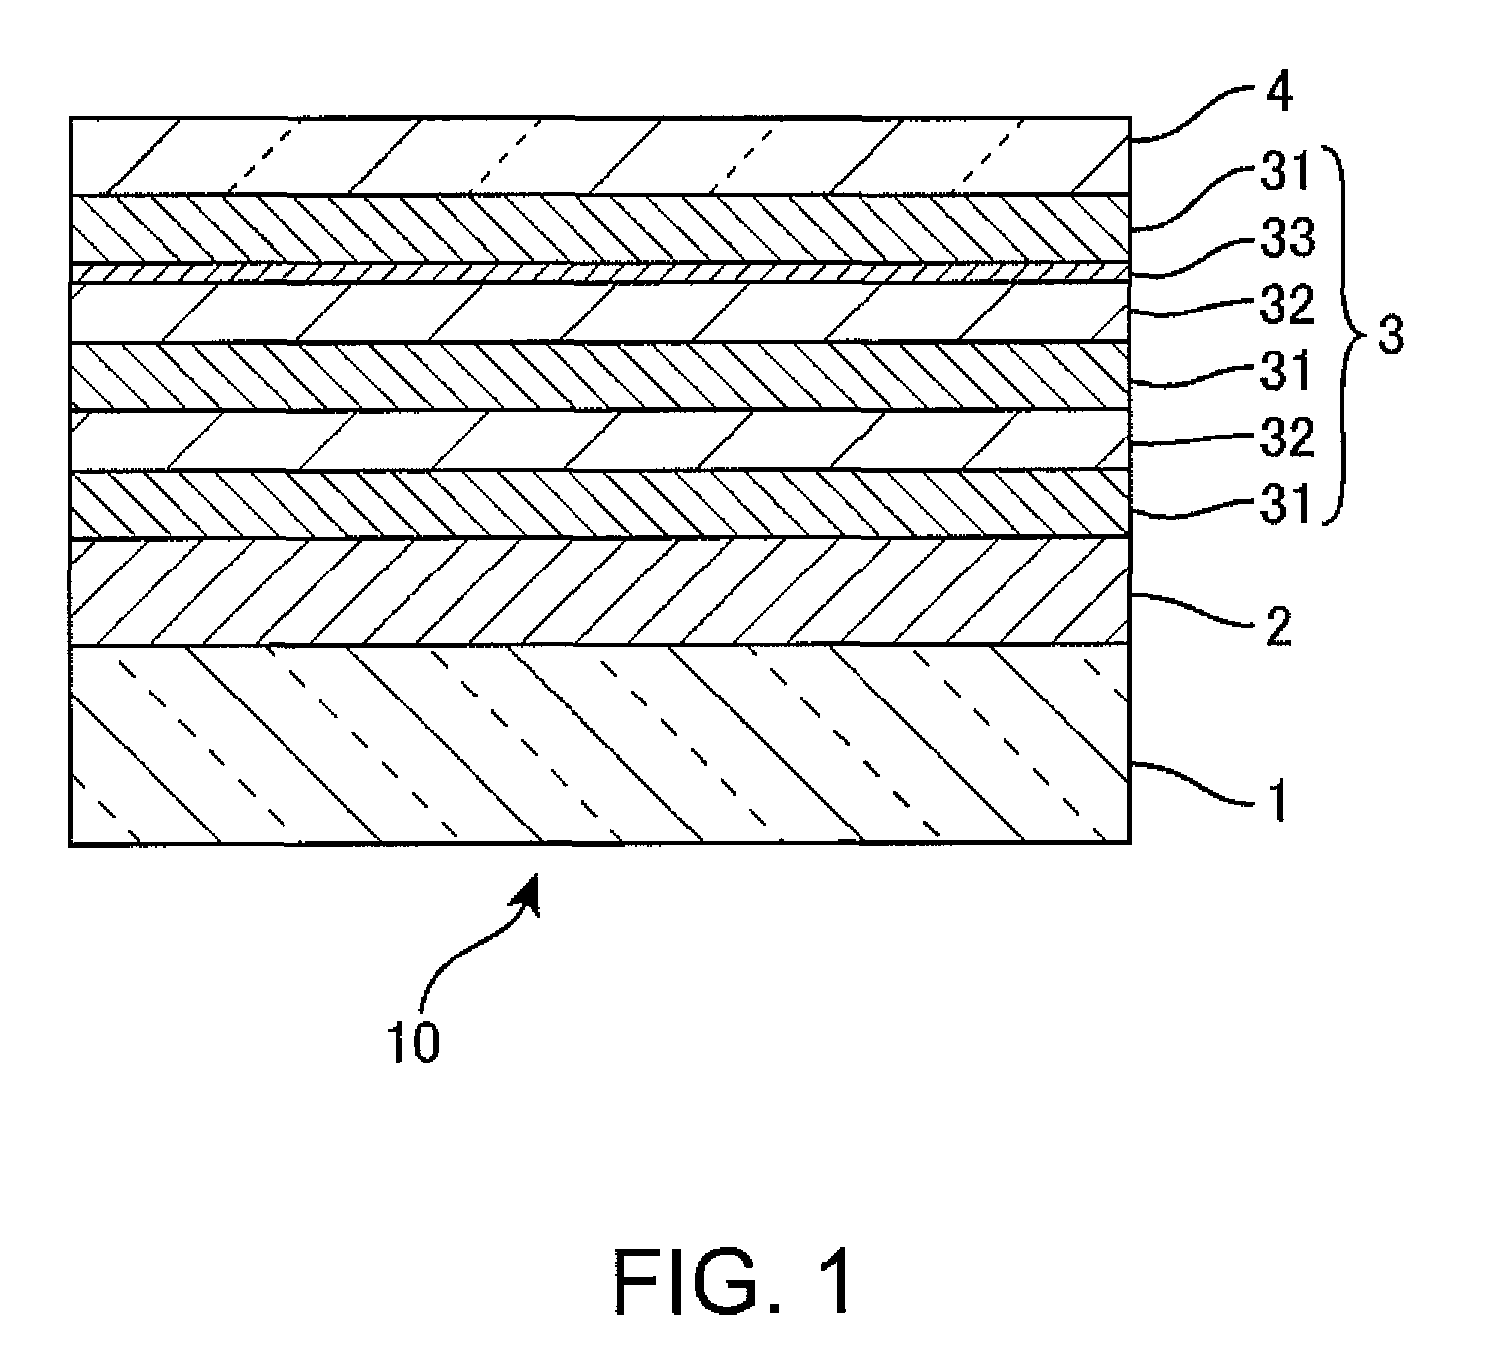 Optical article and method for producing the same